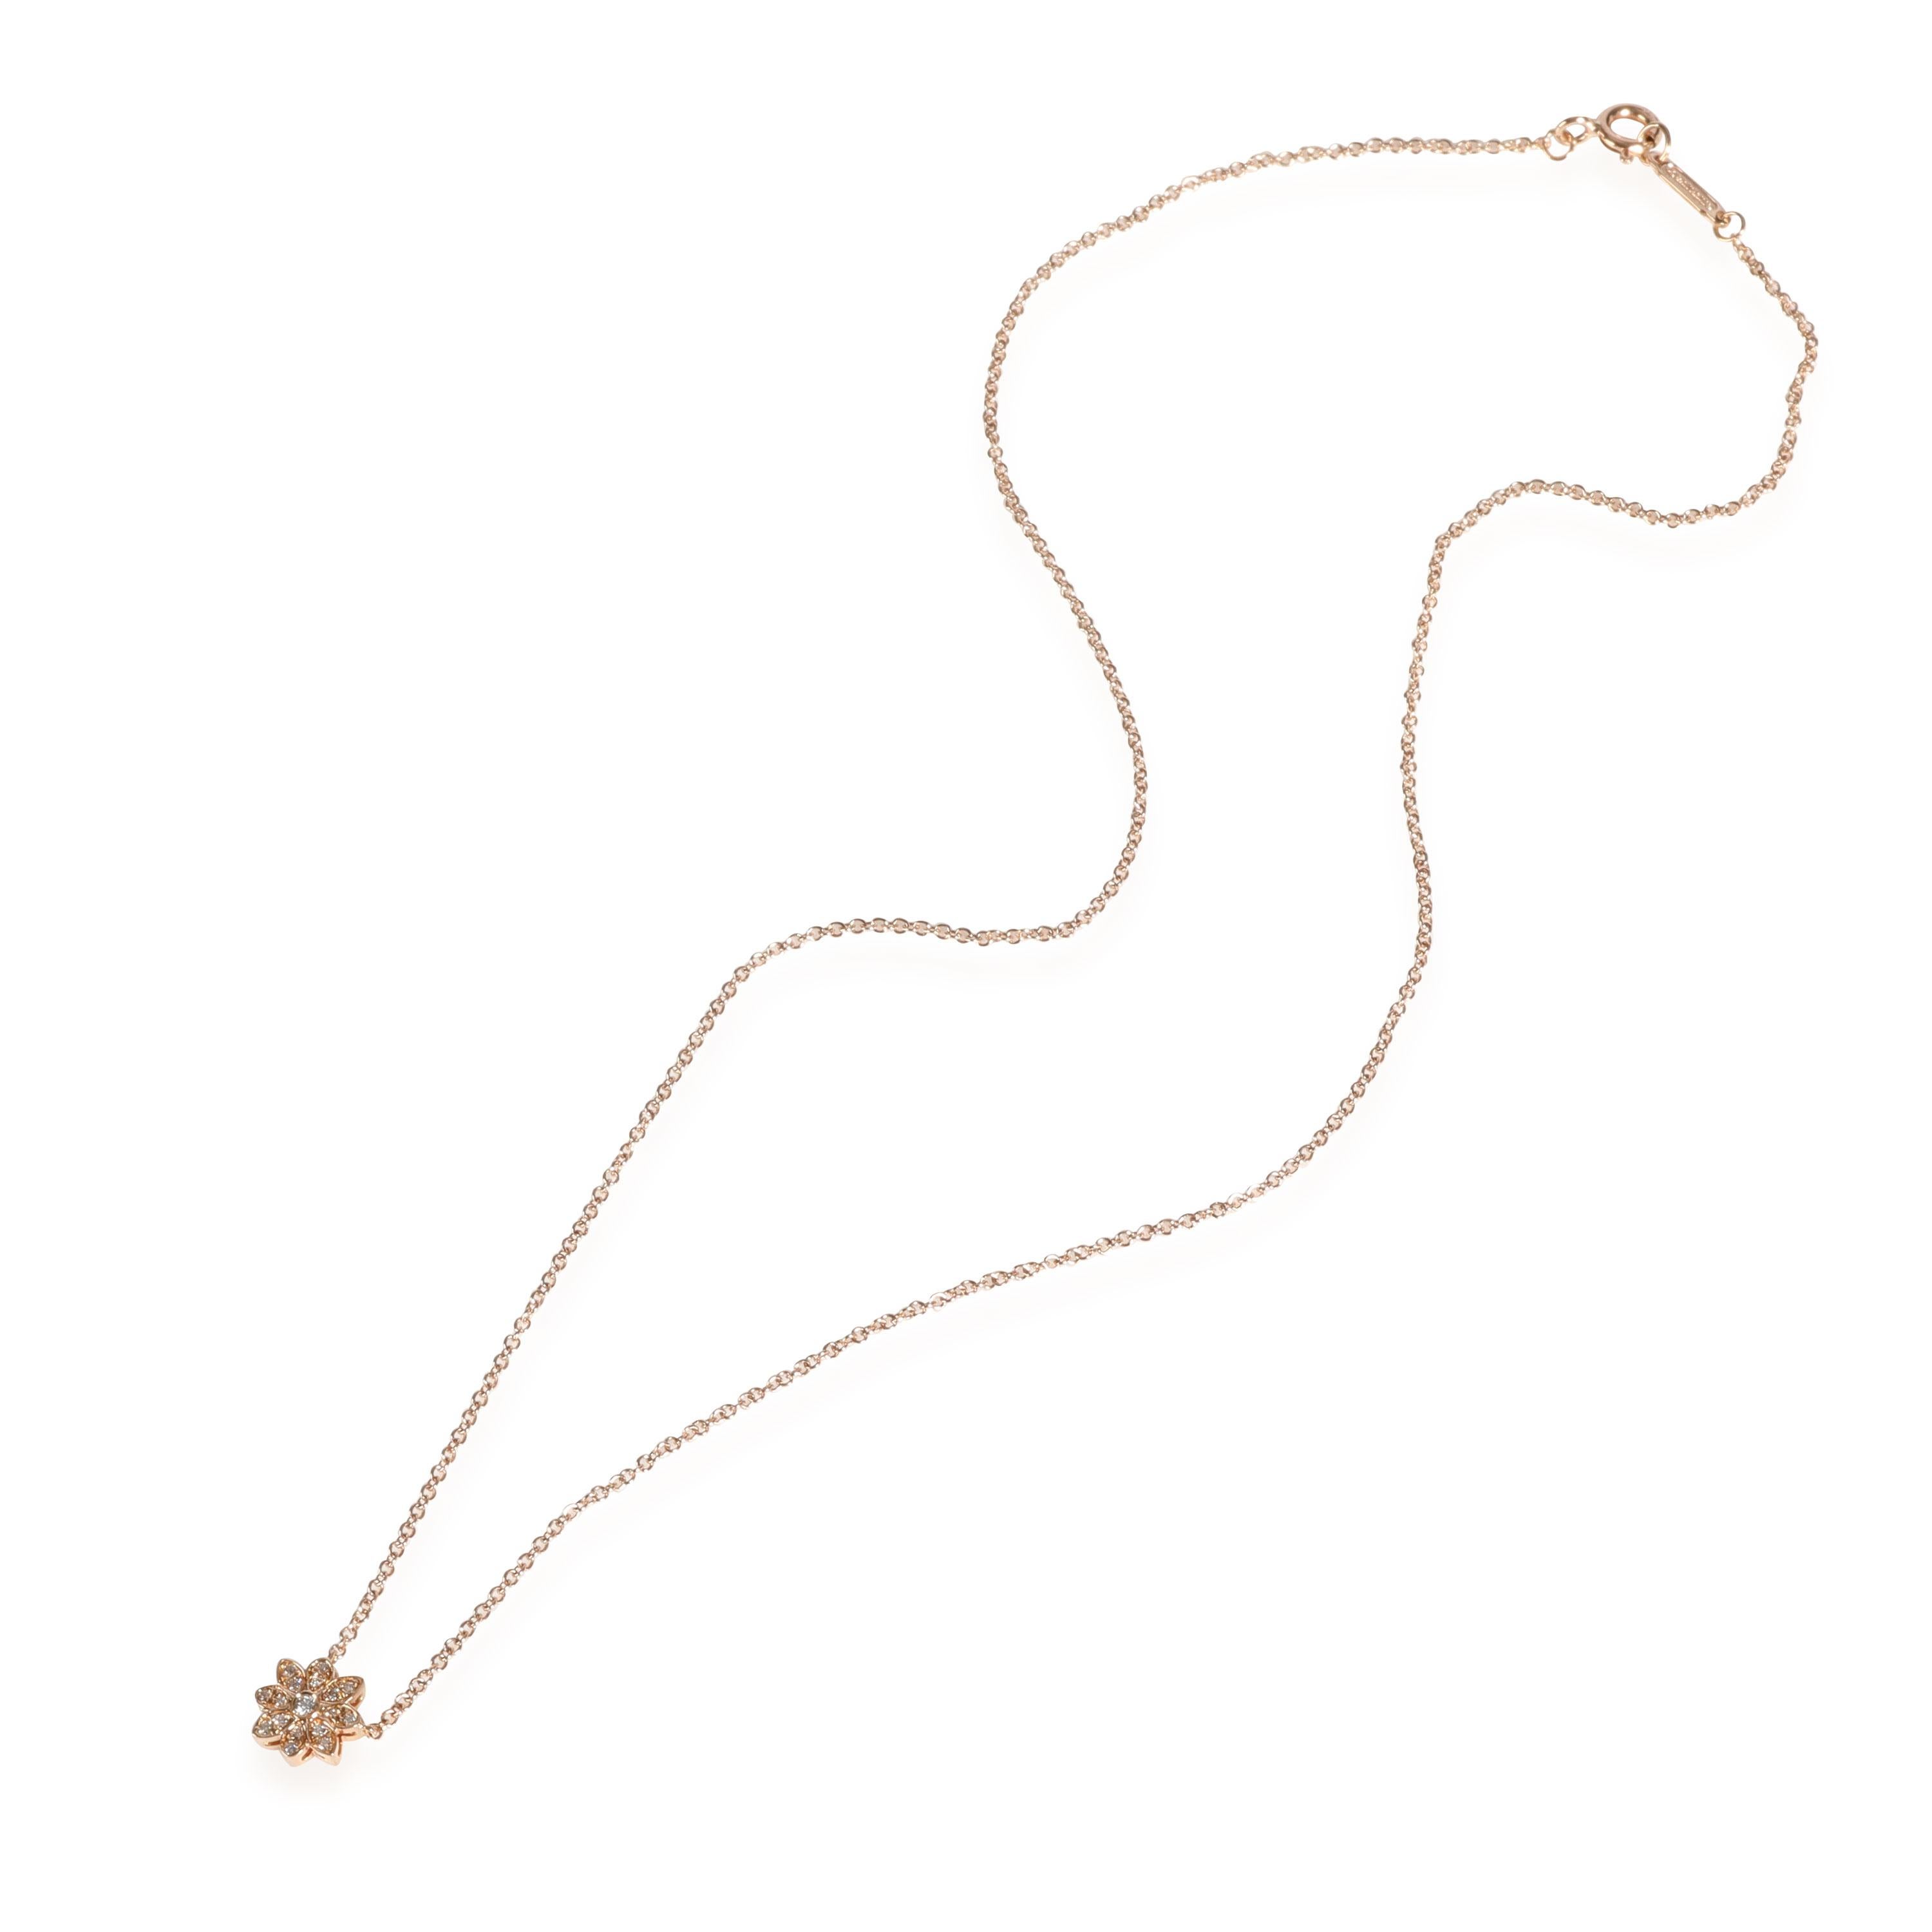 Tiffany & Co. Enchant Flower Necklace with Diamonds in 18K Rose Gold 0.10 CTW

PRIMARY DETAILS
SKU: 109950
Listing Title: Tiffany & Co. Enchant Flower Necklace with Diamonds in 18K Rose Gold 0.10 CTW
Condition Description: Retails for 2200 USD. In